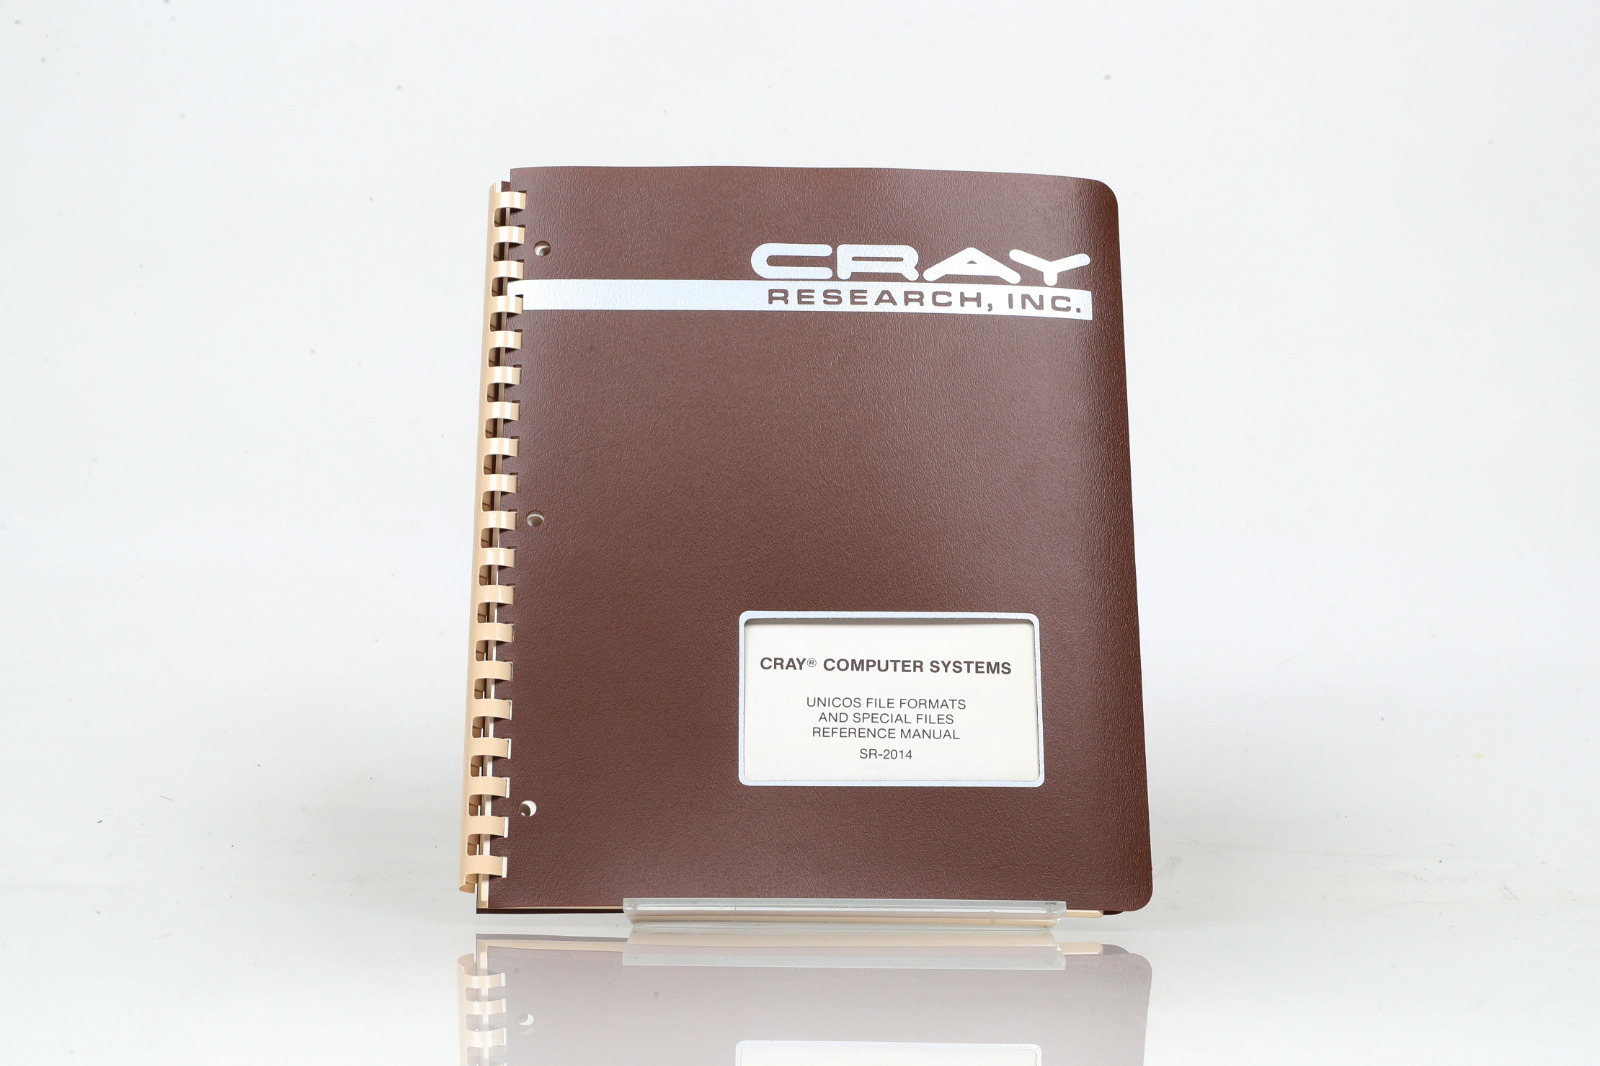 Cray Research Comput UNICOS FILE FORMATS & SPECIAL FILES REFERENCE MANUAL SR-201